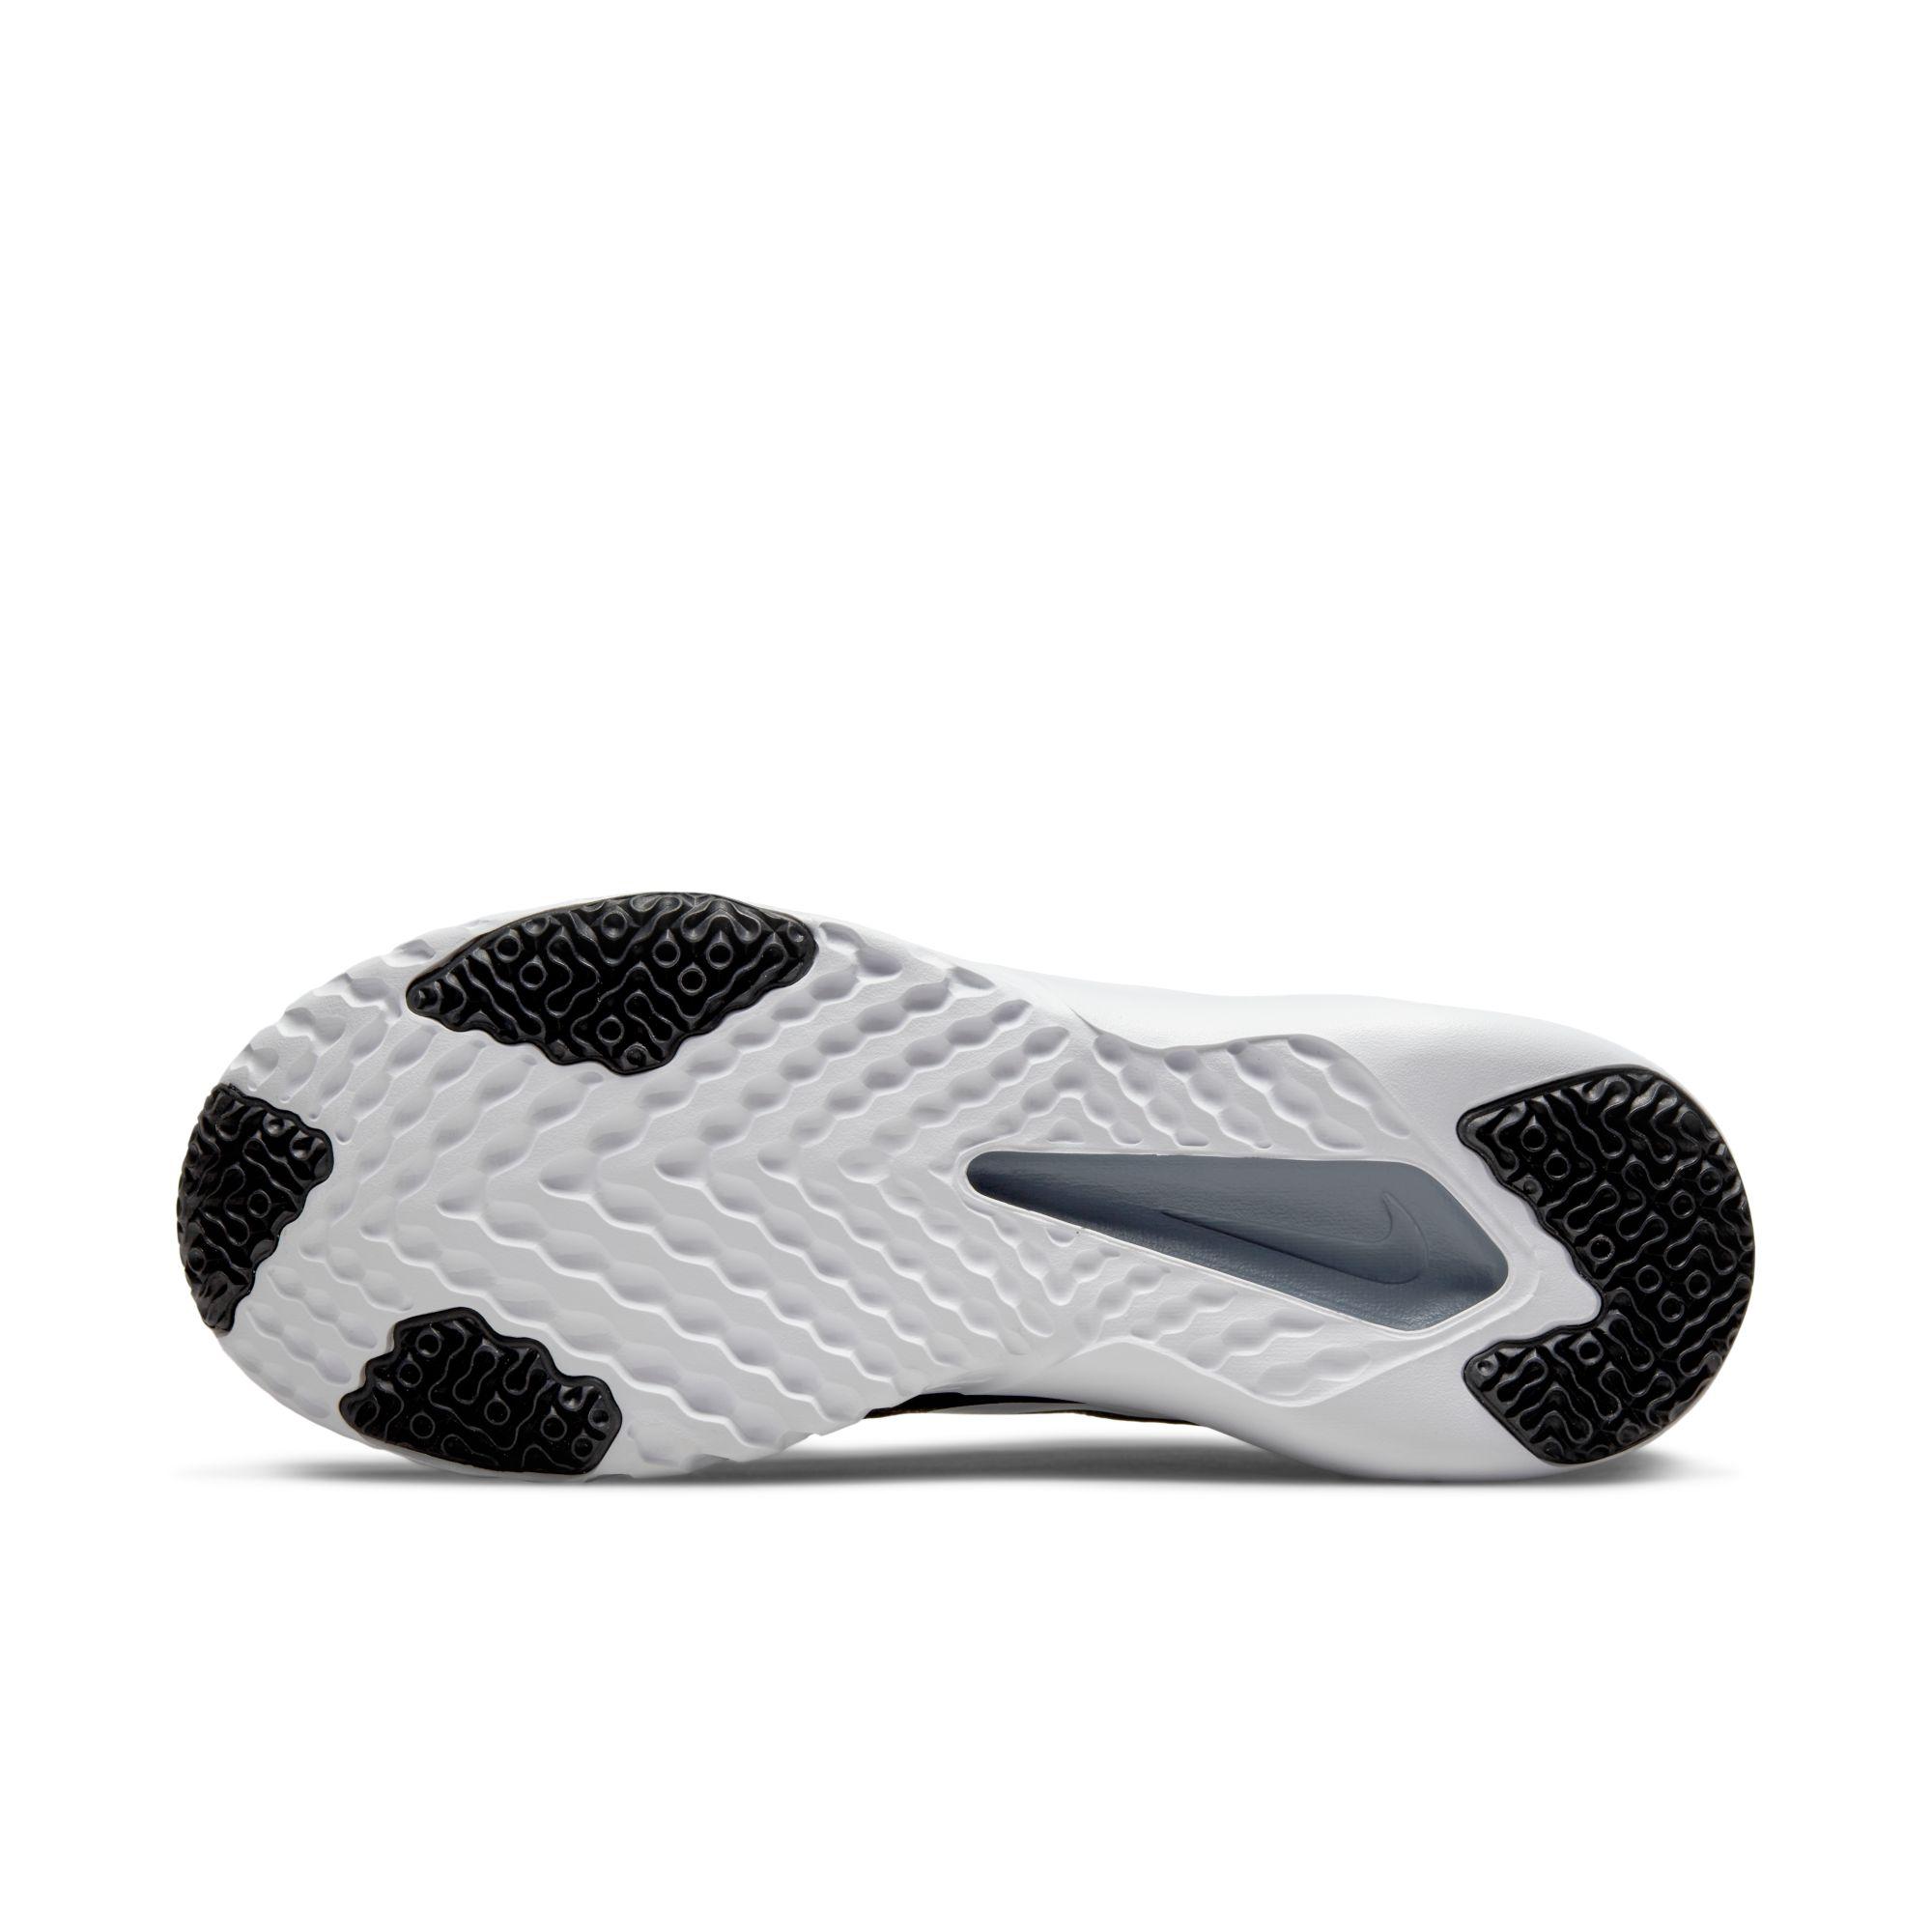 Nike Lace Renew Retaliation Tr 2 Training Shoes in Black,Cool Grey,White  (Black) for Men | Lyst